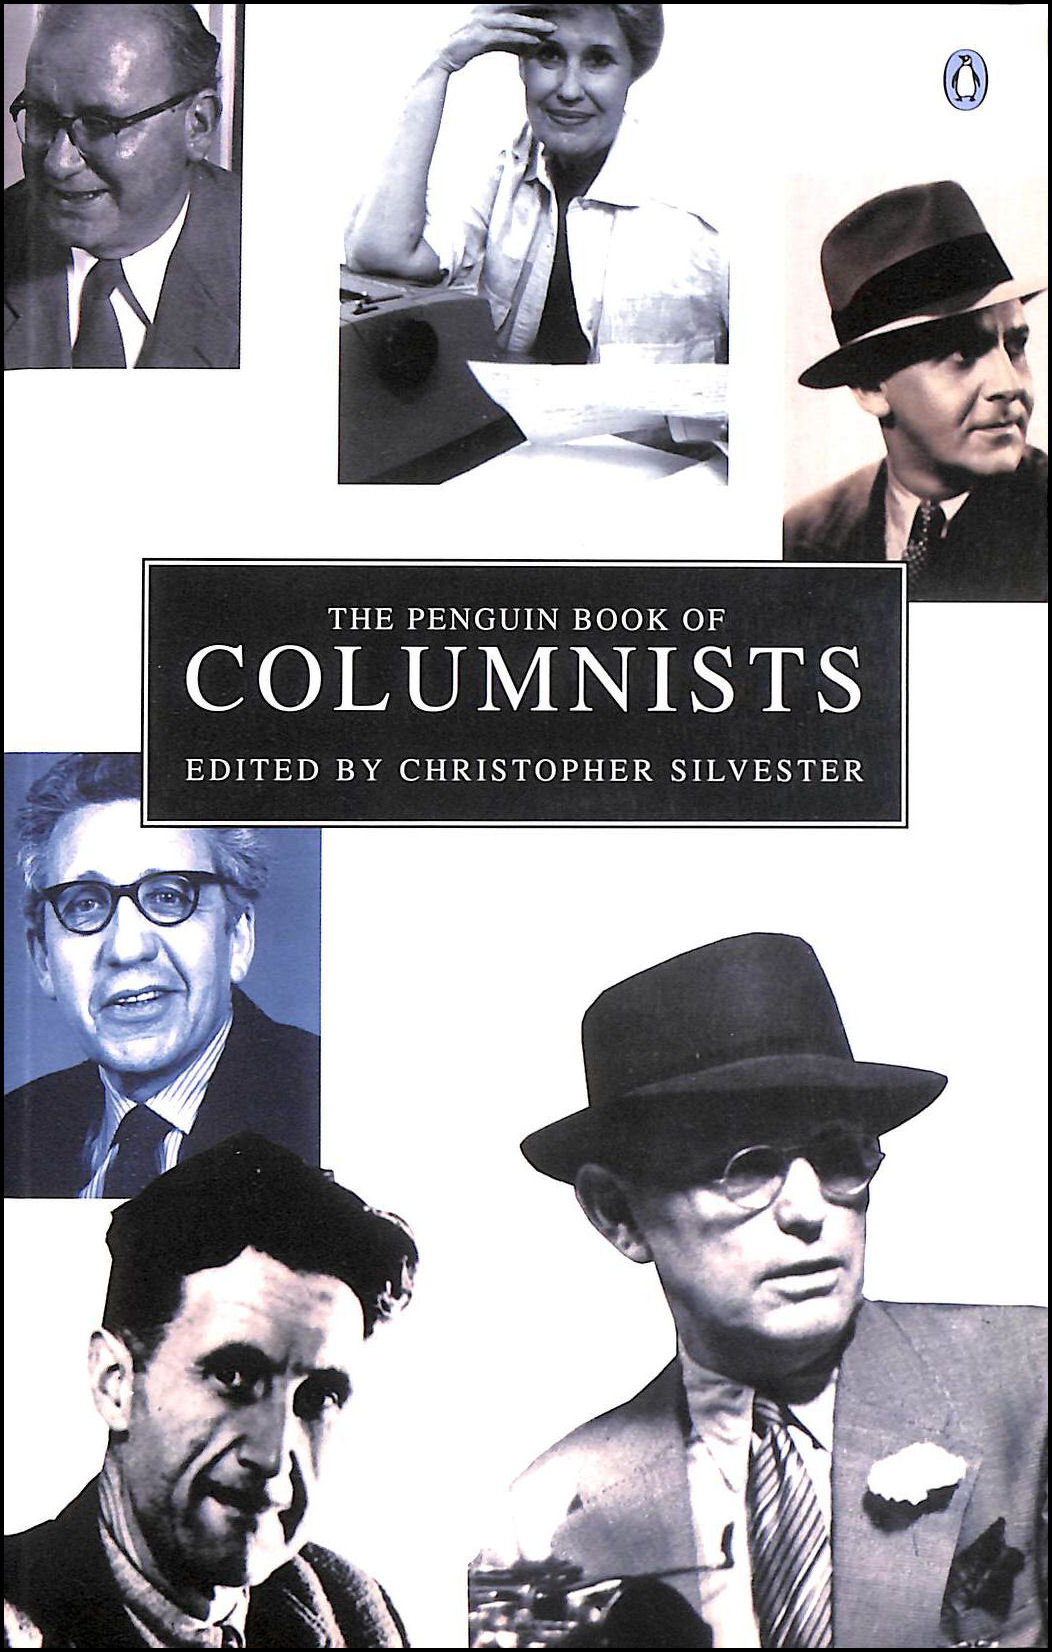 SILVESTER, CHRISTOPHER [EDITOR] - The Penguin Book of Columnists